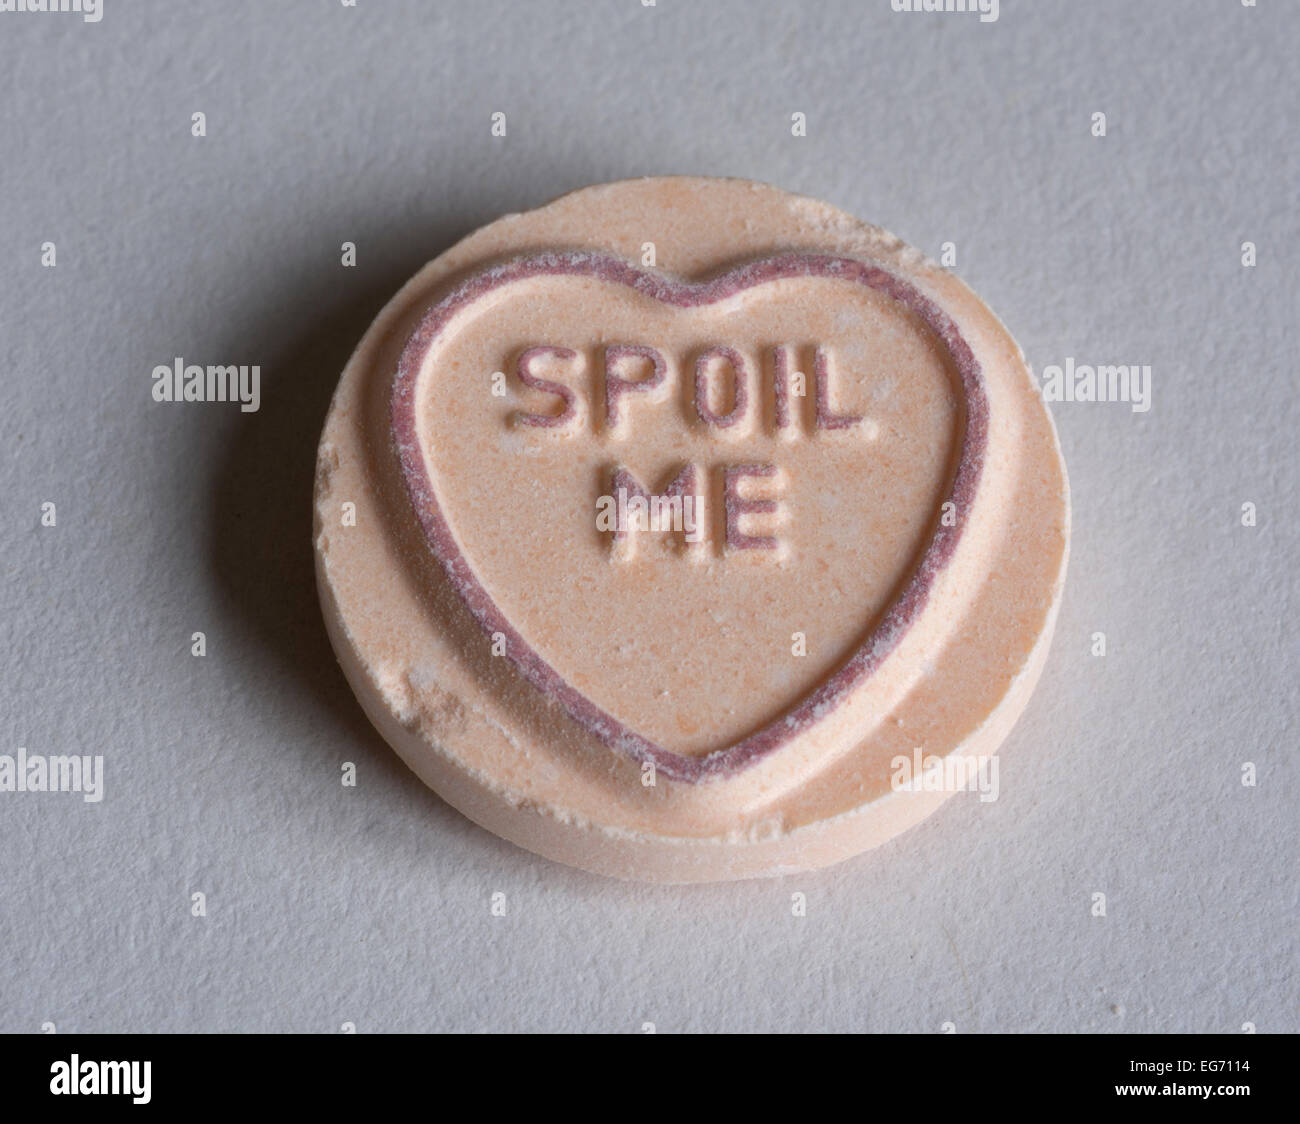 A Love Hearts sweet with the message "Spoil me". Stock Photo